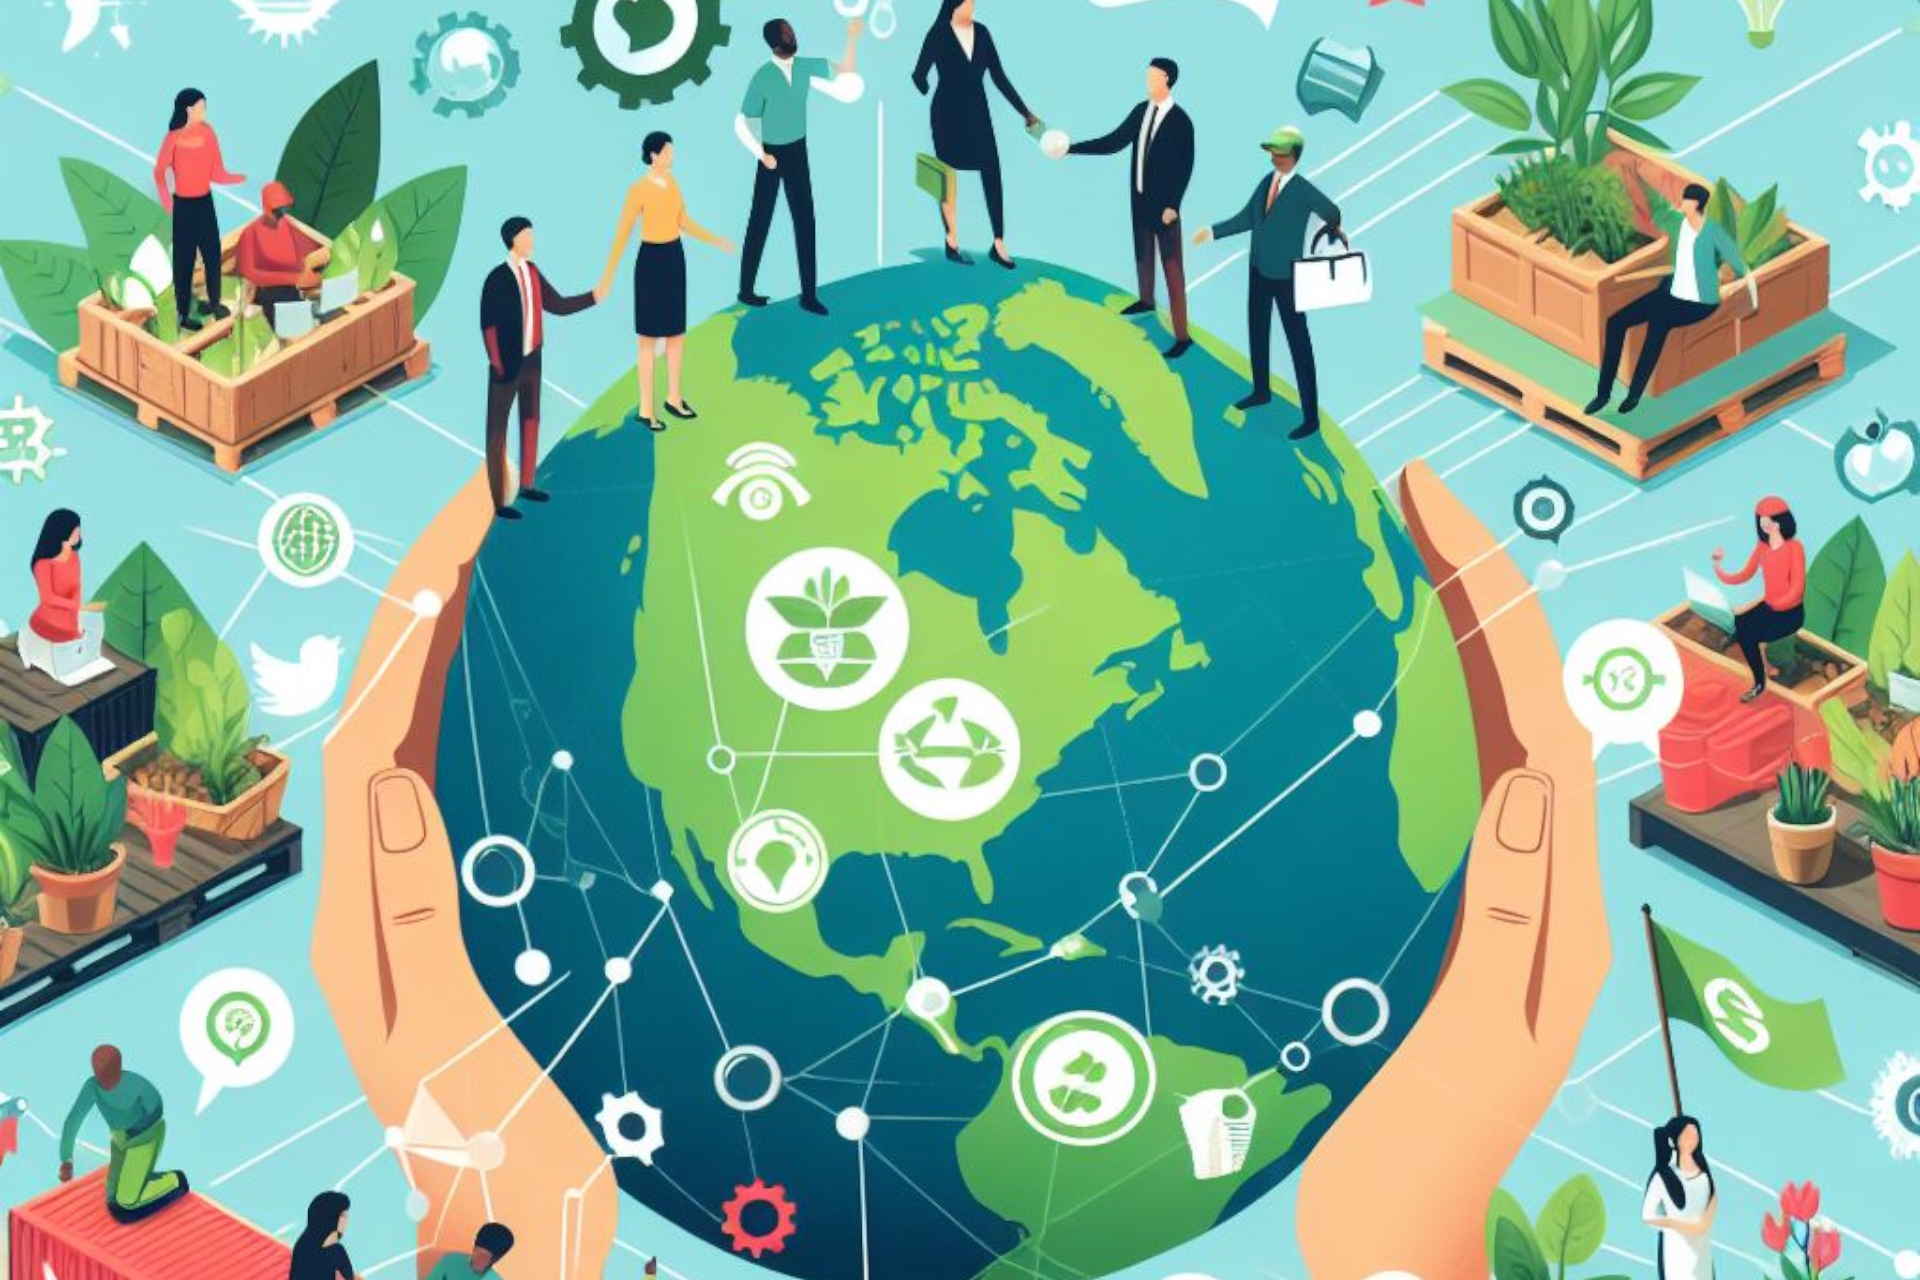 North America's Role in Promoting Sustainable Supply Chains